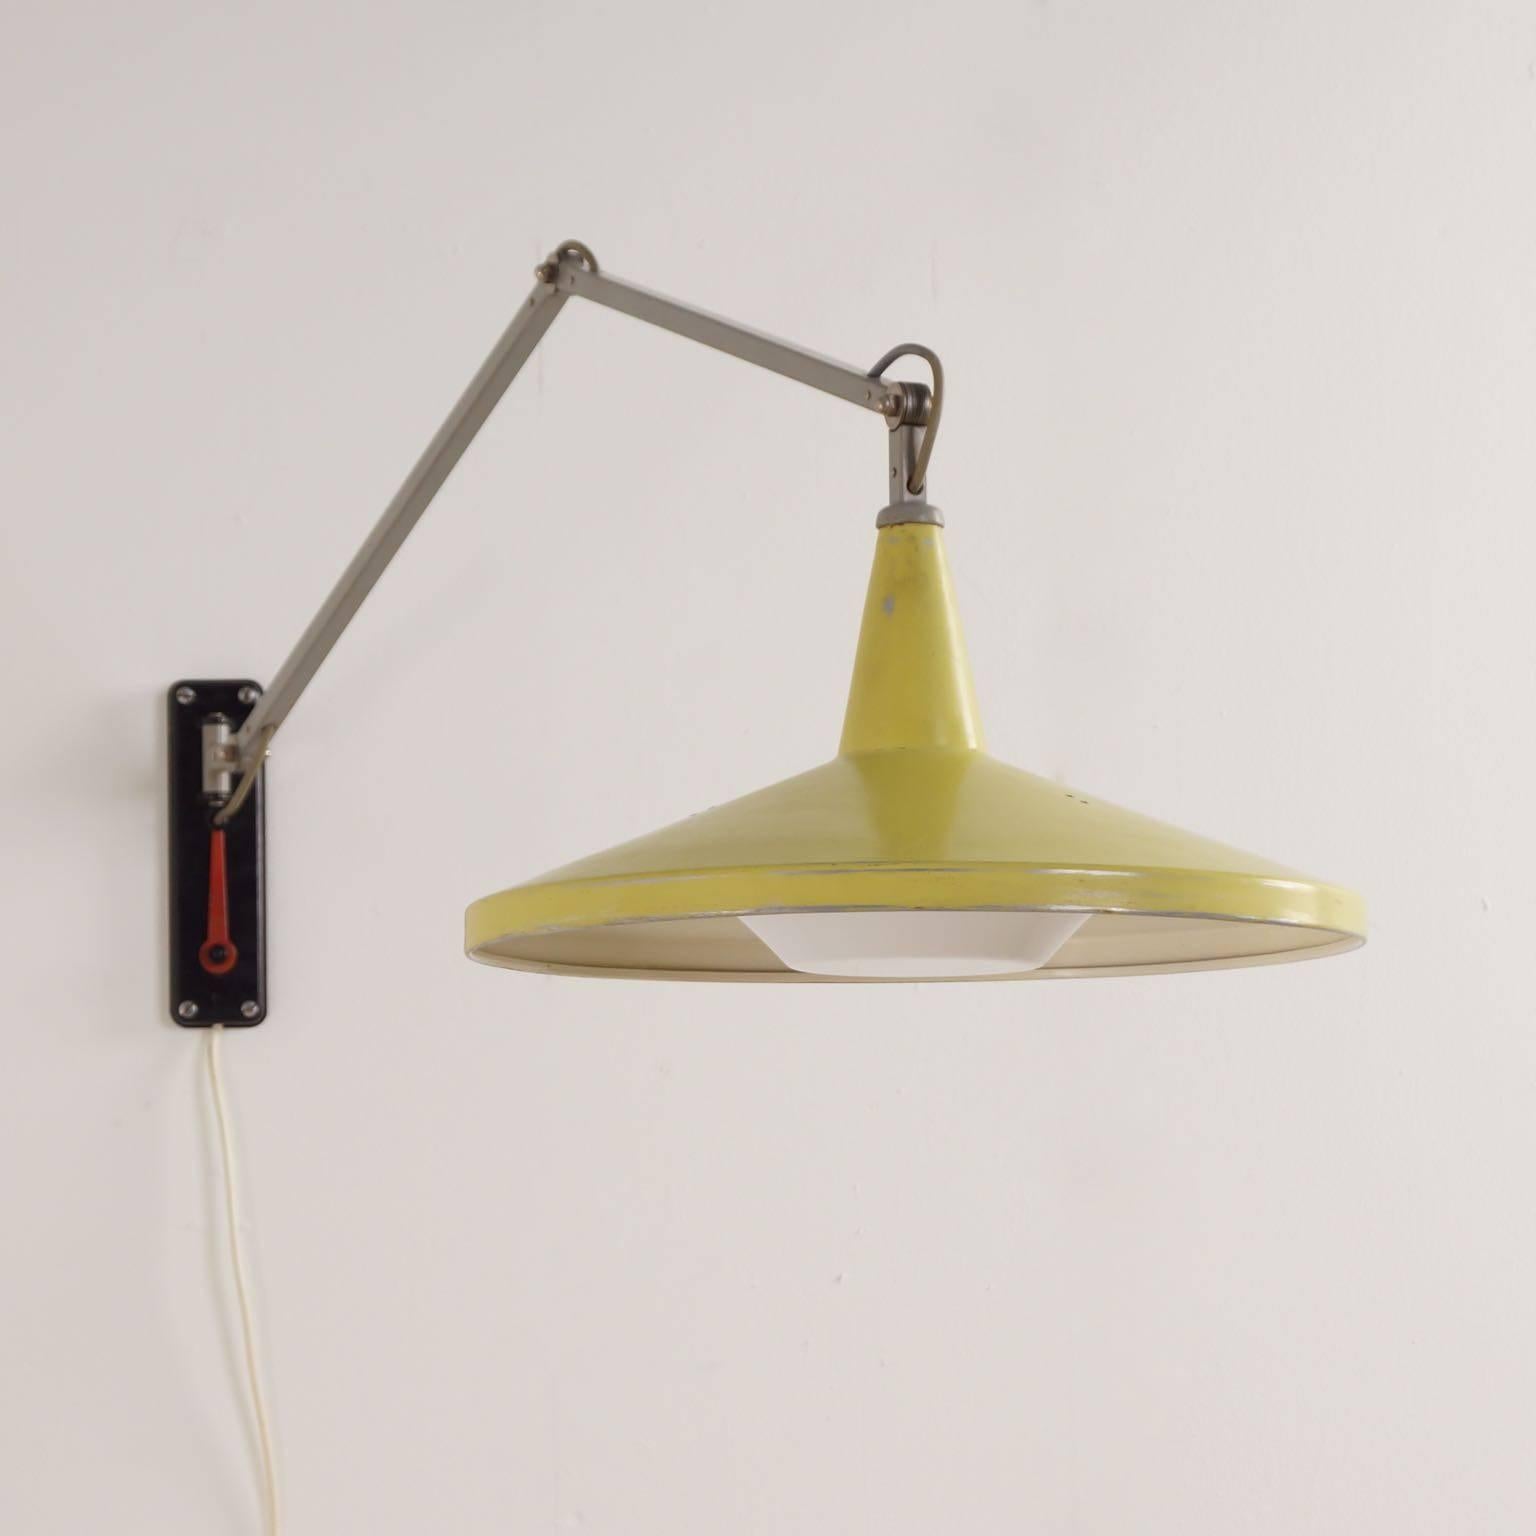 Rare Yellow Panama Wall Lamp No. 4050 by W. Rietveld for Gispen, 1956 For Sale 1